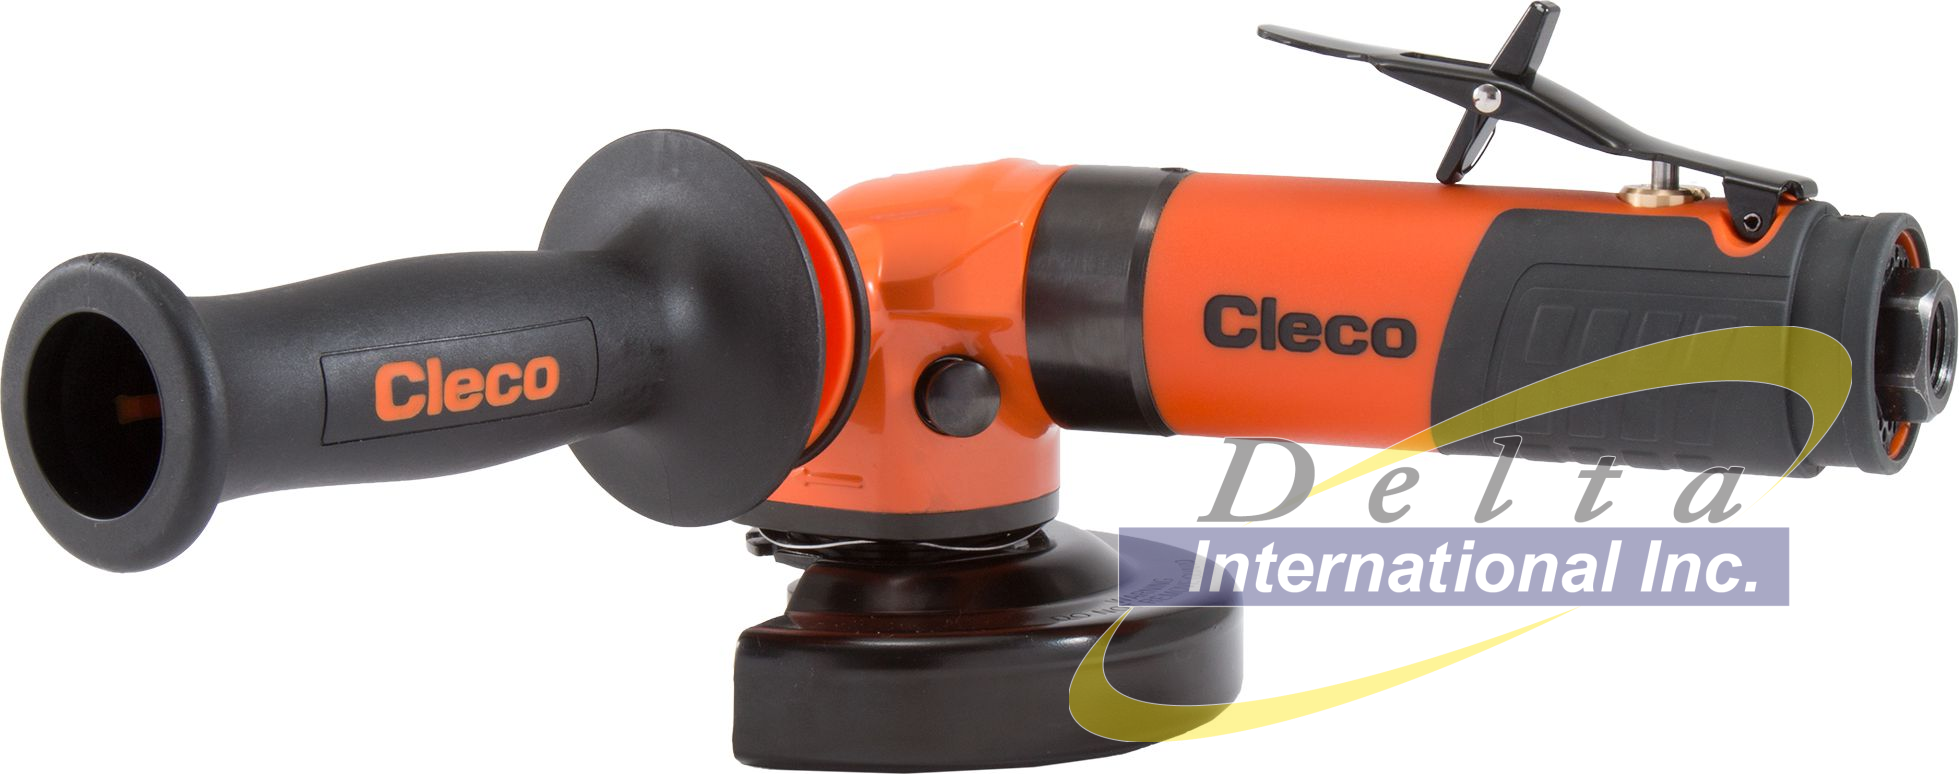 Cleco C3120A45-58OH - Right Angle Grinder